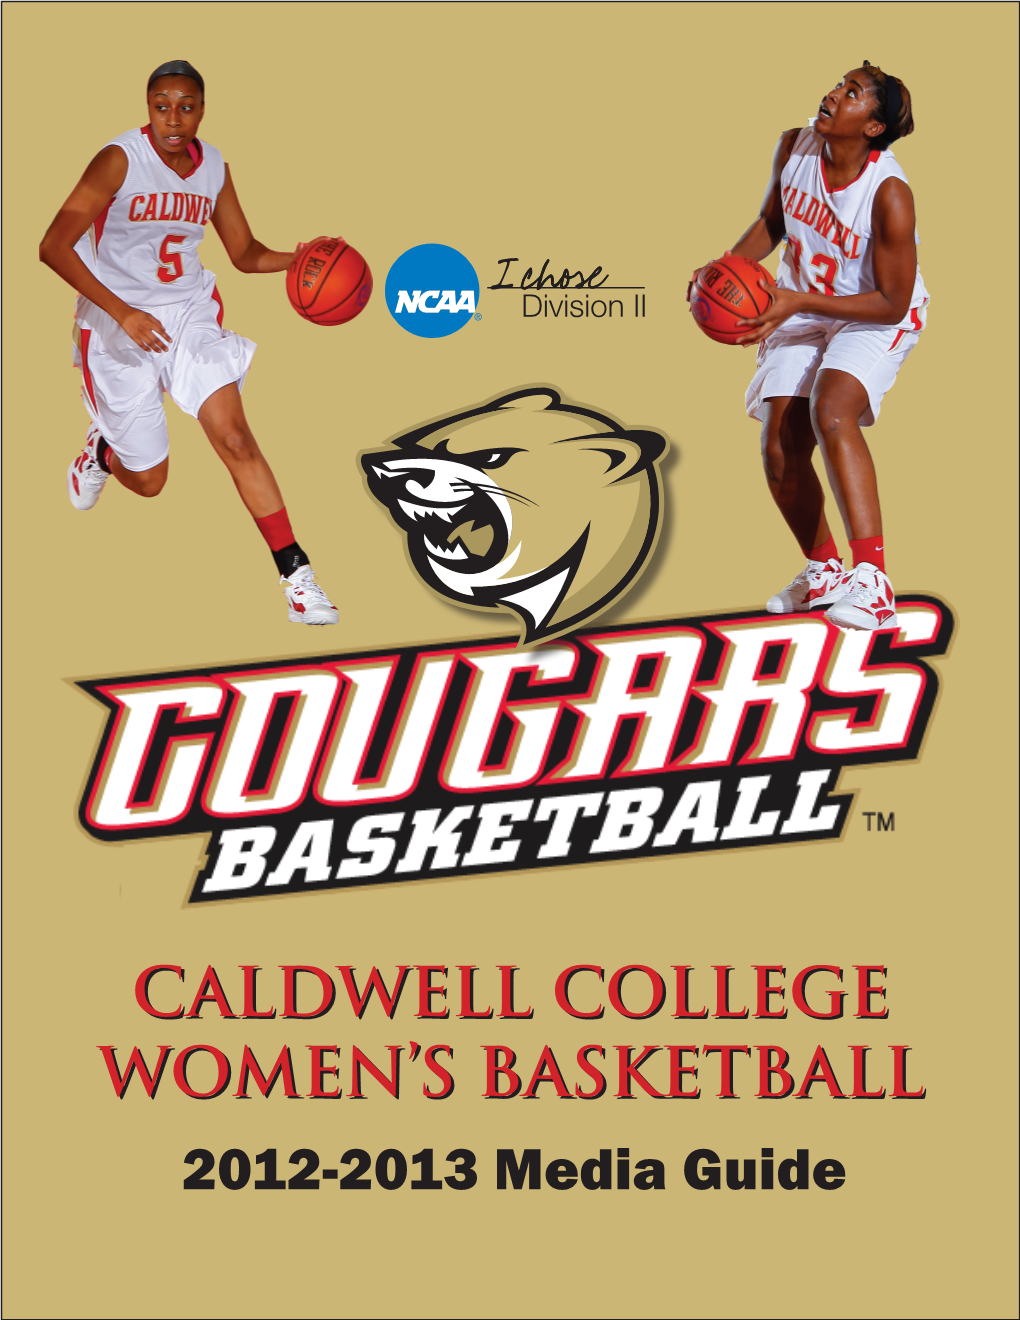 Caldwell College 2012-2013 Media Guide Women's Basketball